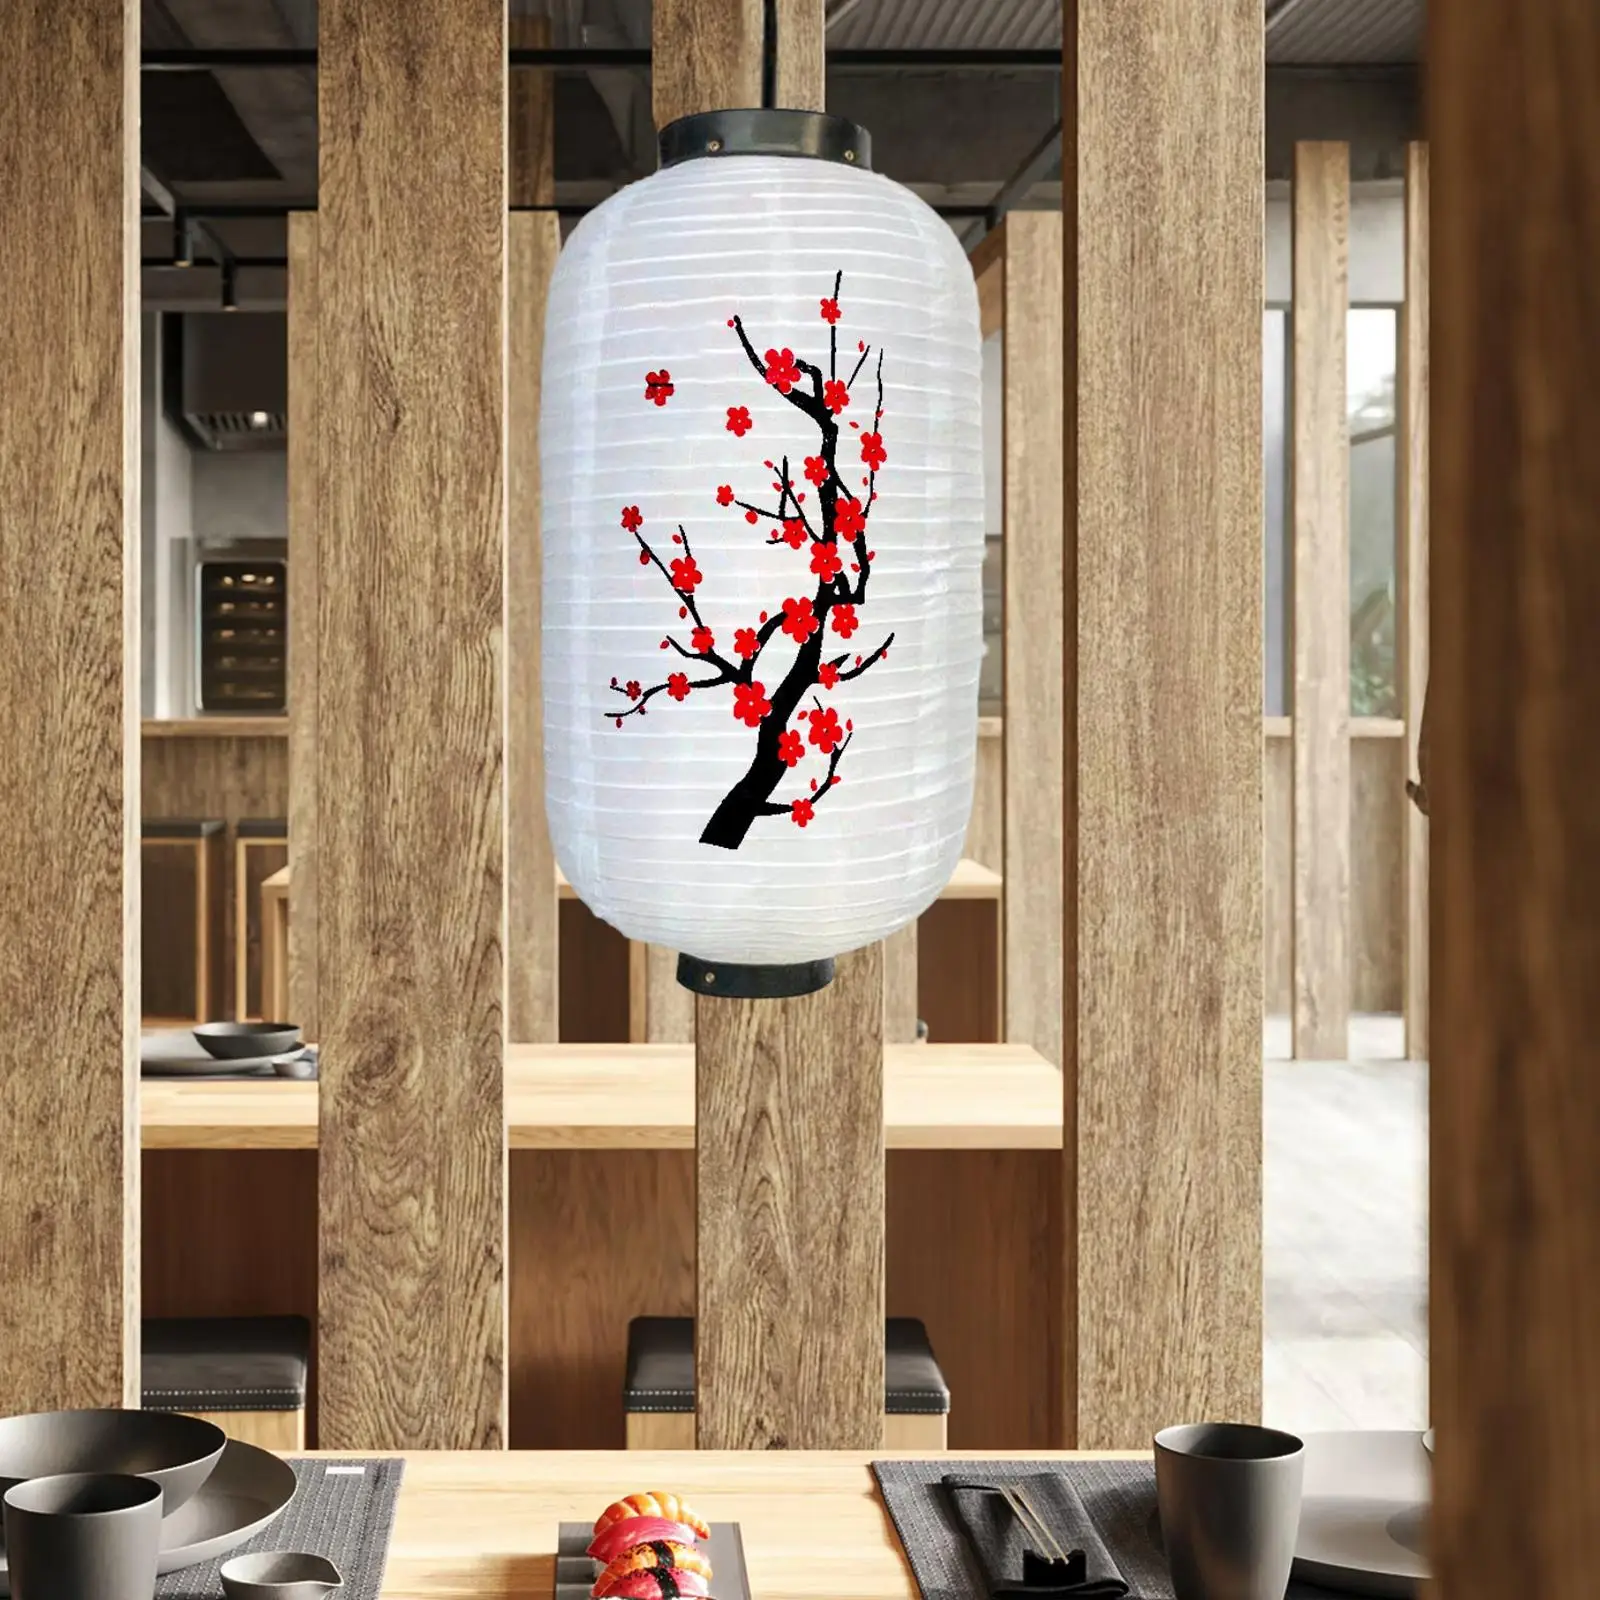 Japanese Style Lantern Japanese Eateries Decor for Indoor New Year Outdoor